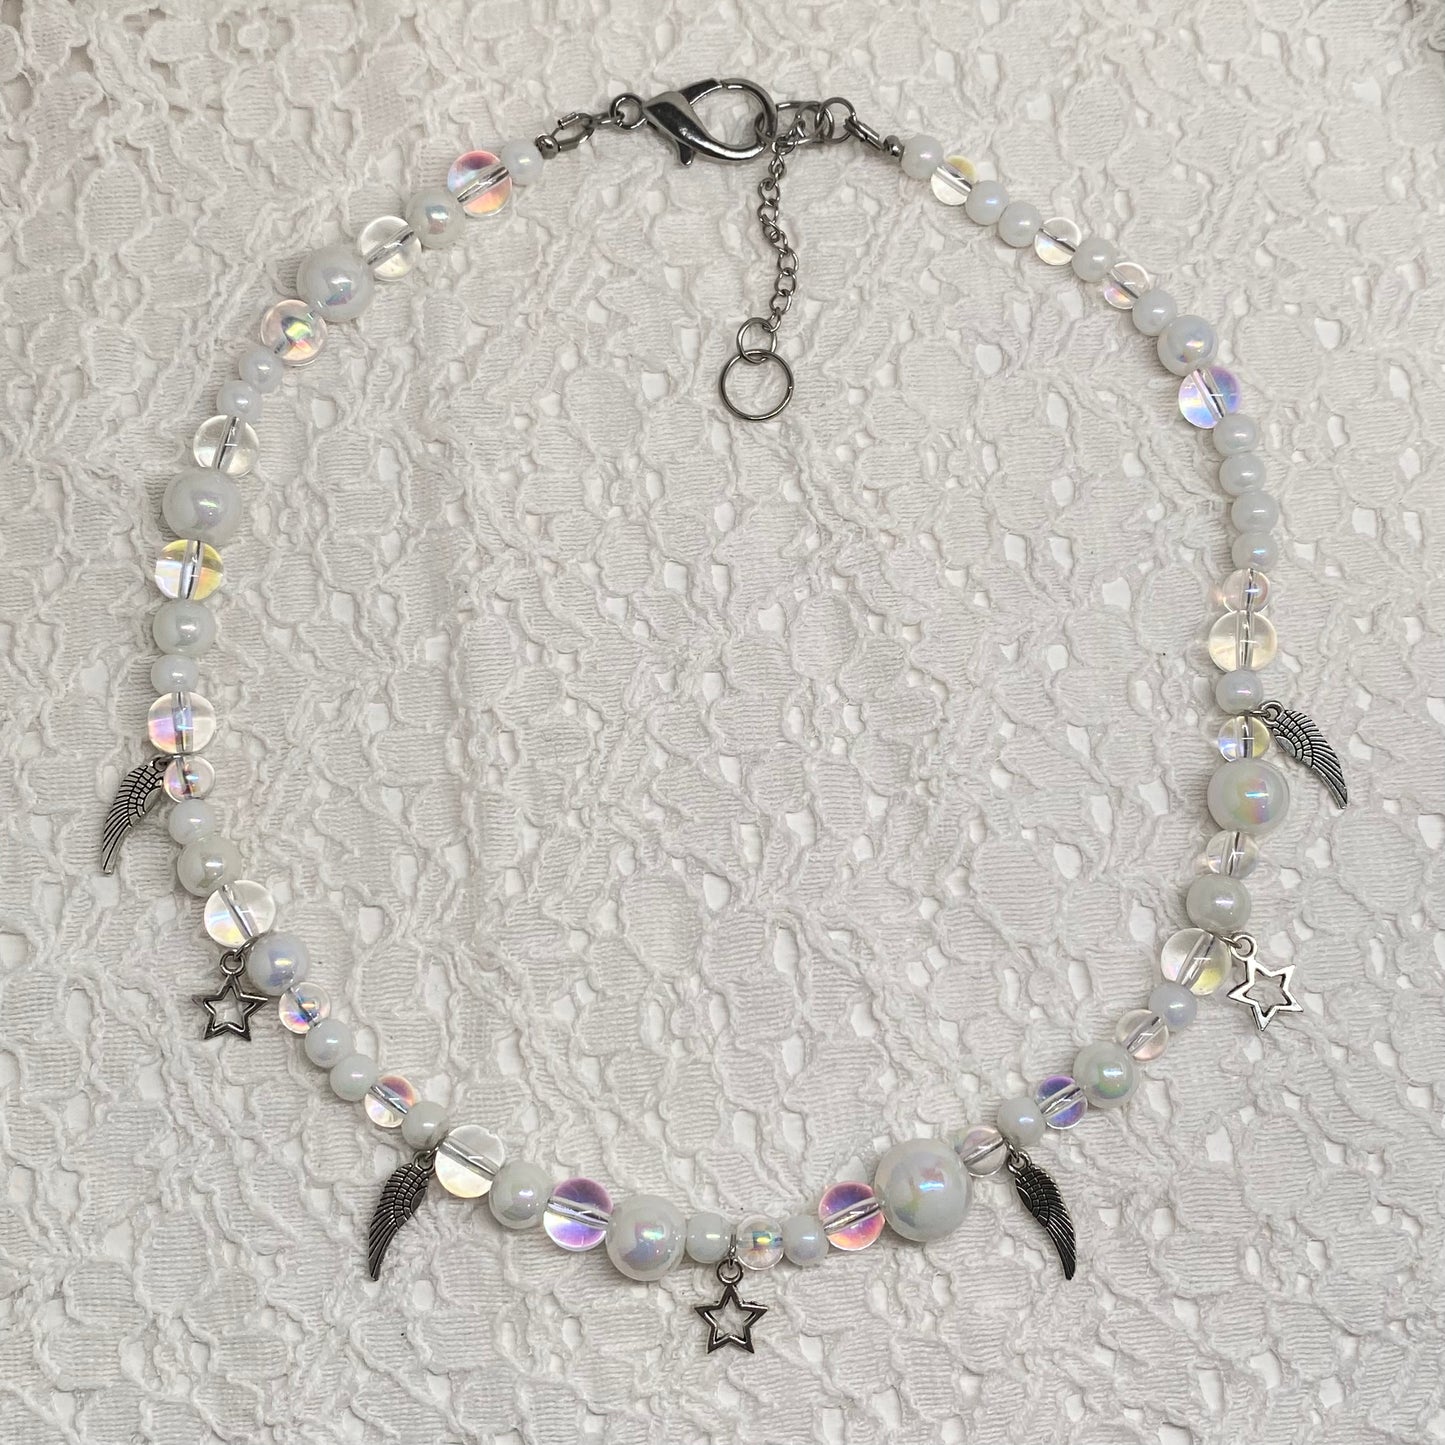 Celestial Beings Necklace